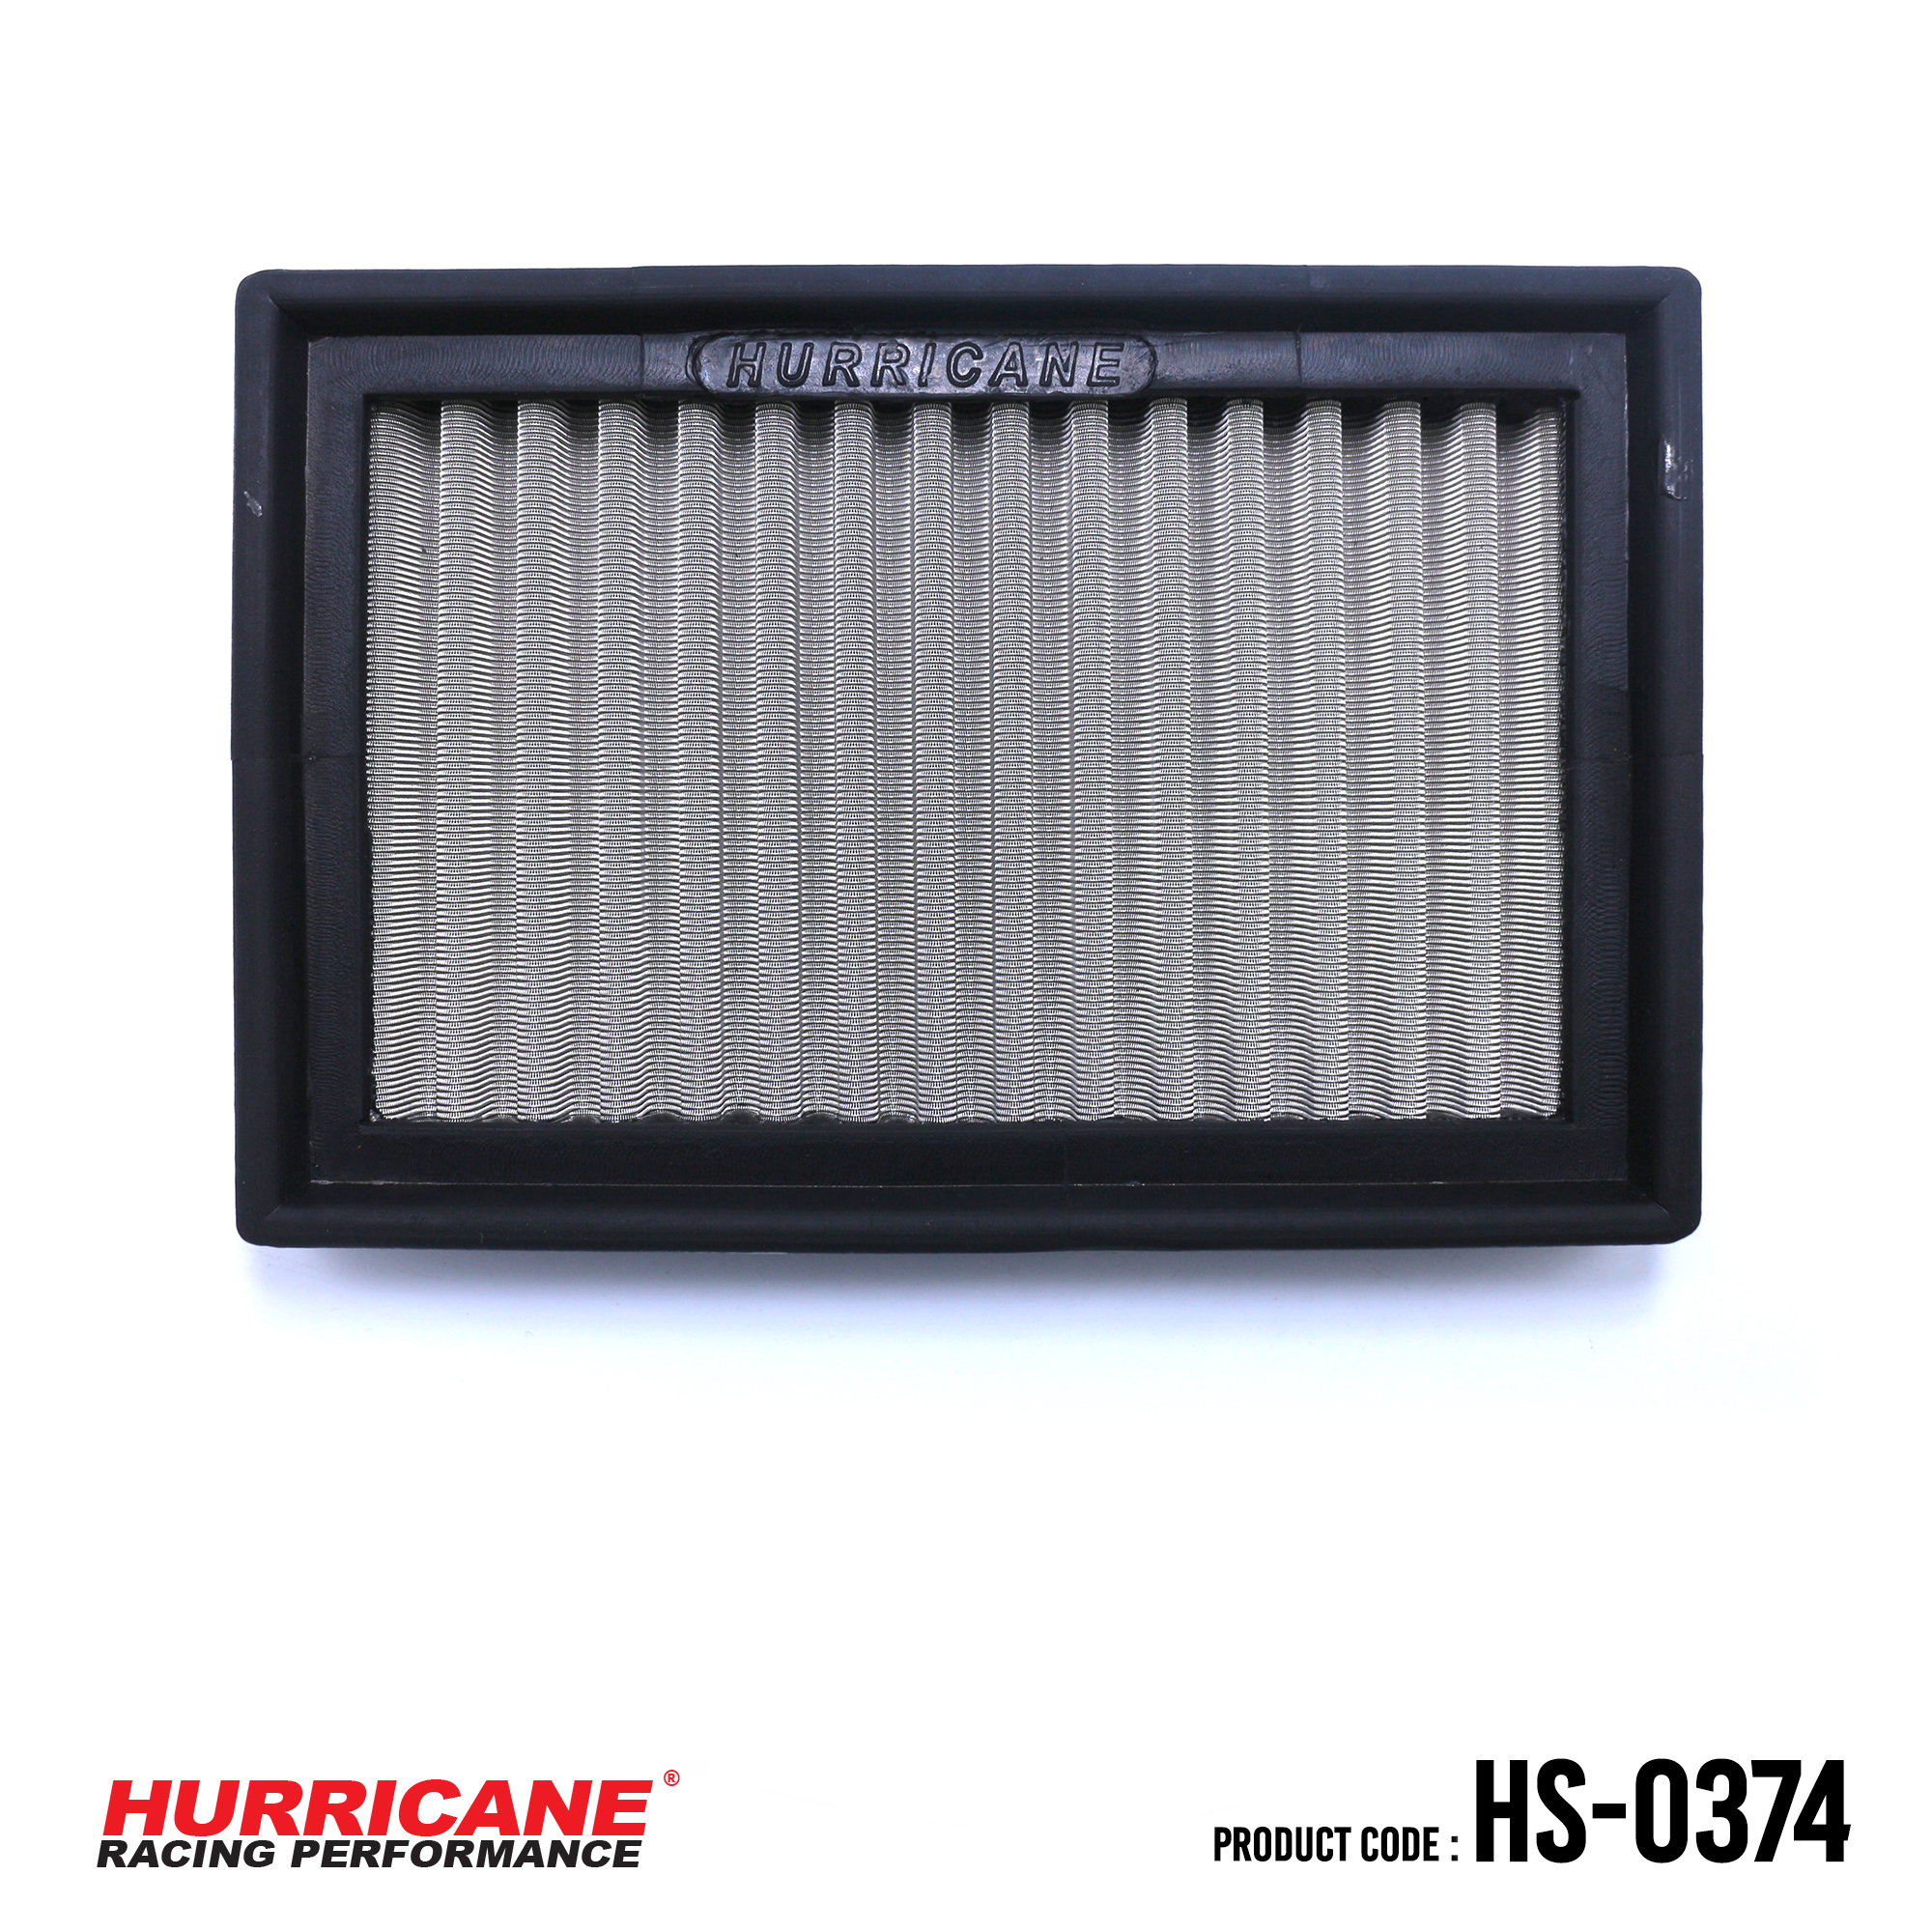 HURRICANE STAINLESS STEEL AIR FILTER FOR HS-0374 Toyota